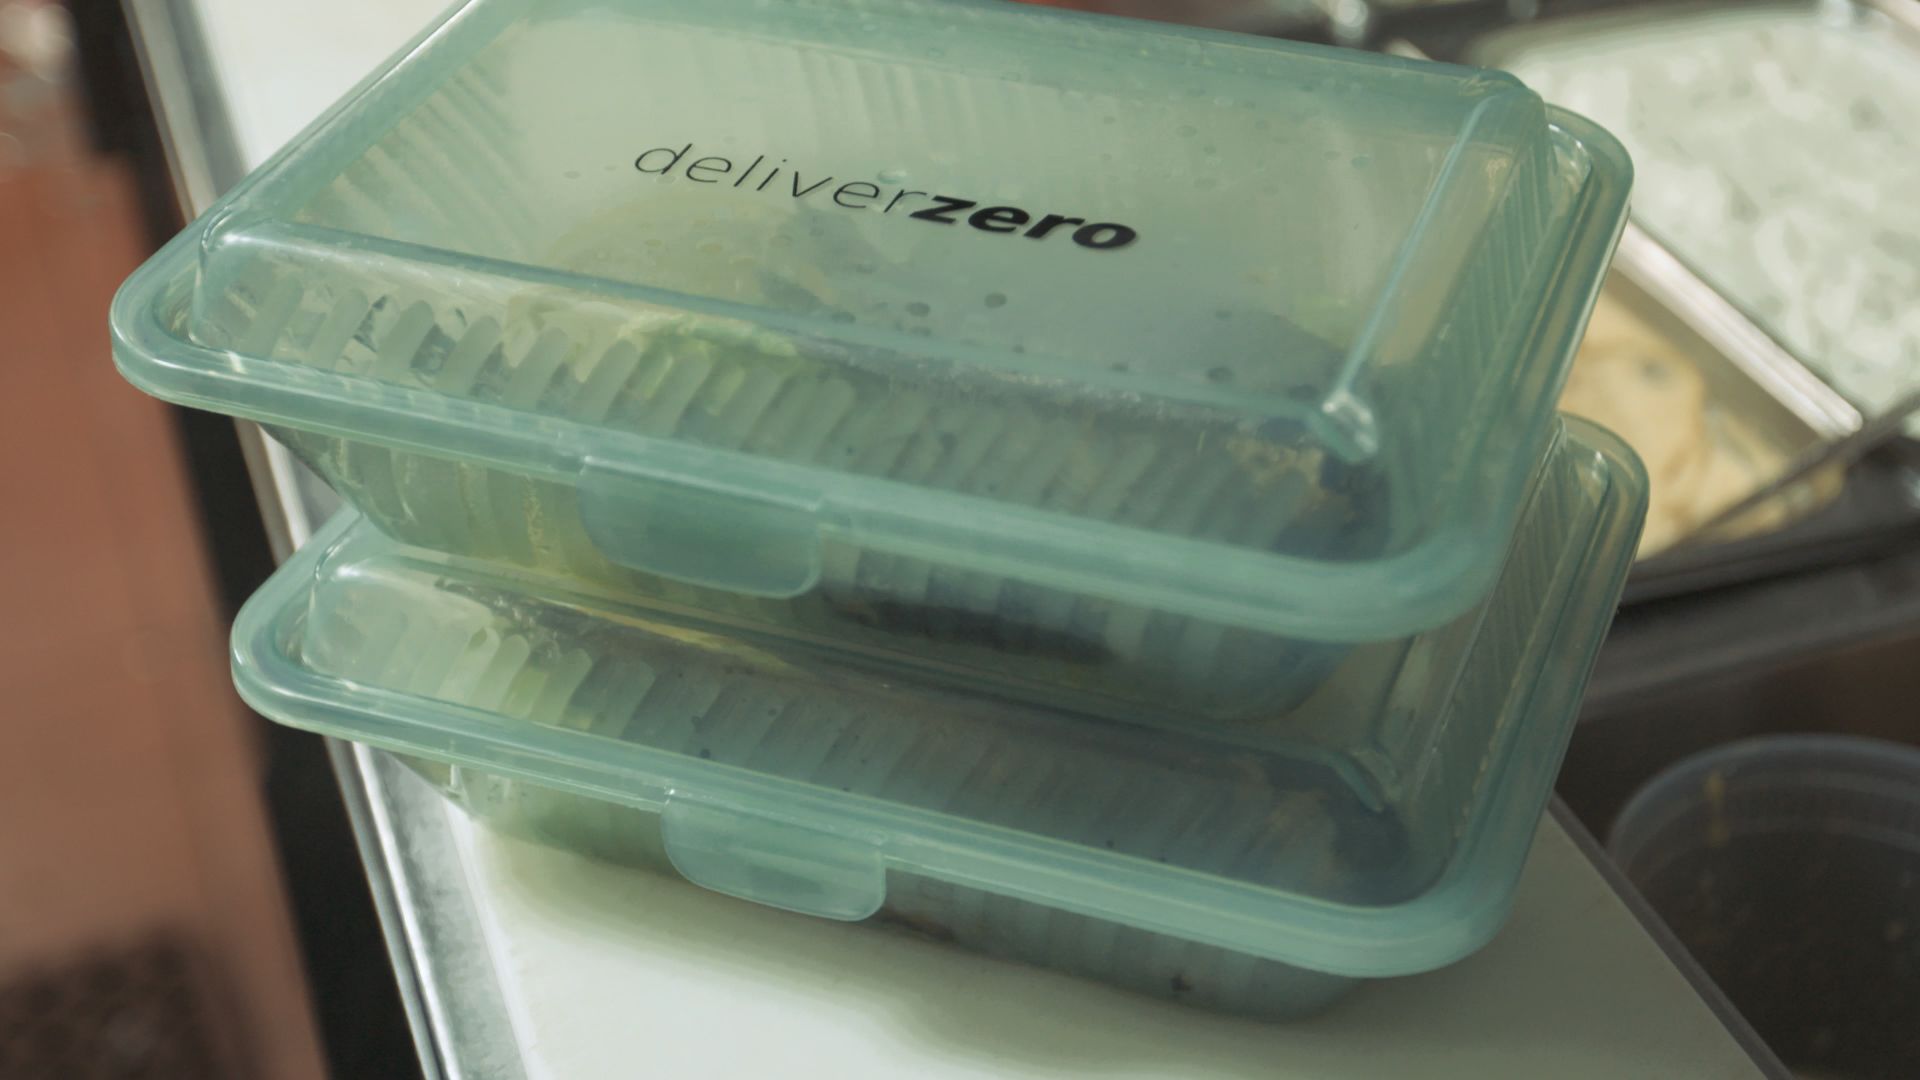 Take Out Containers - To Go Boxes